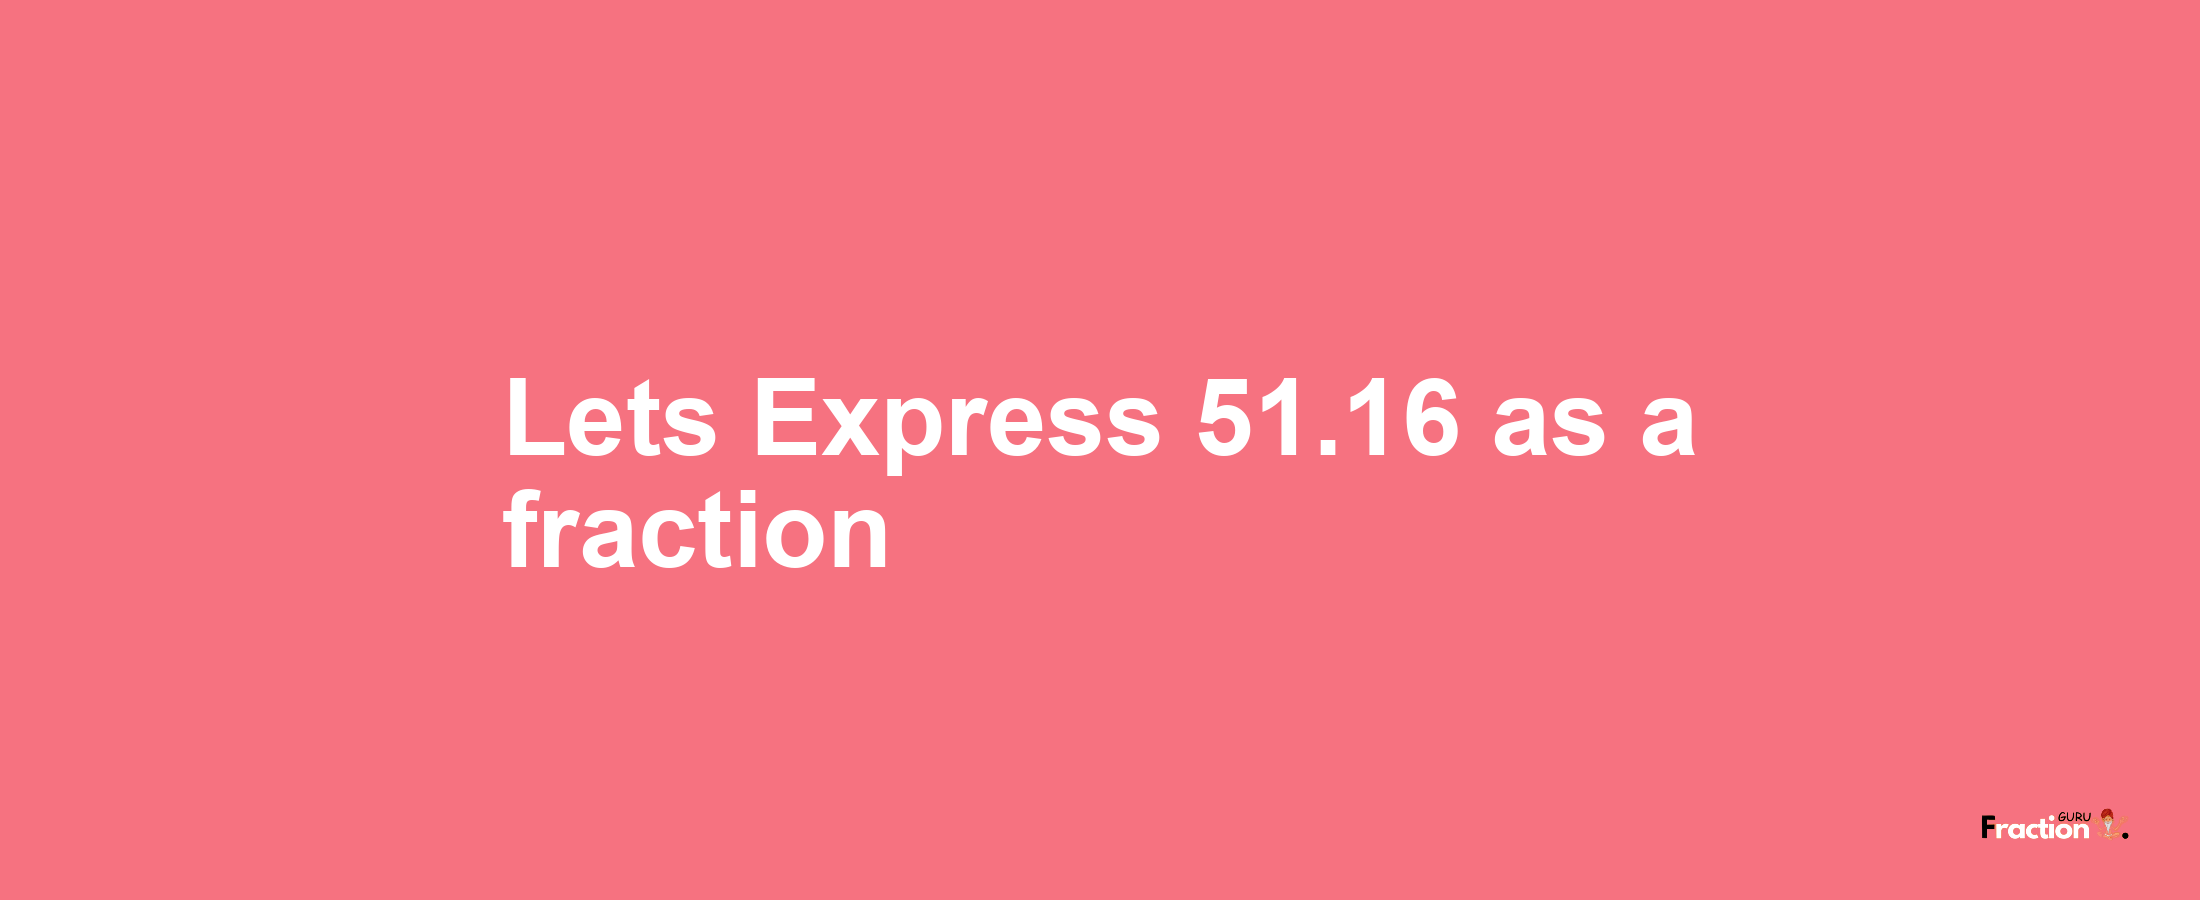 Lets Express 51.16 as afraction